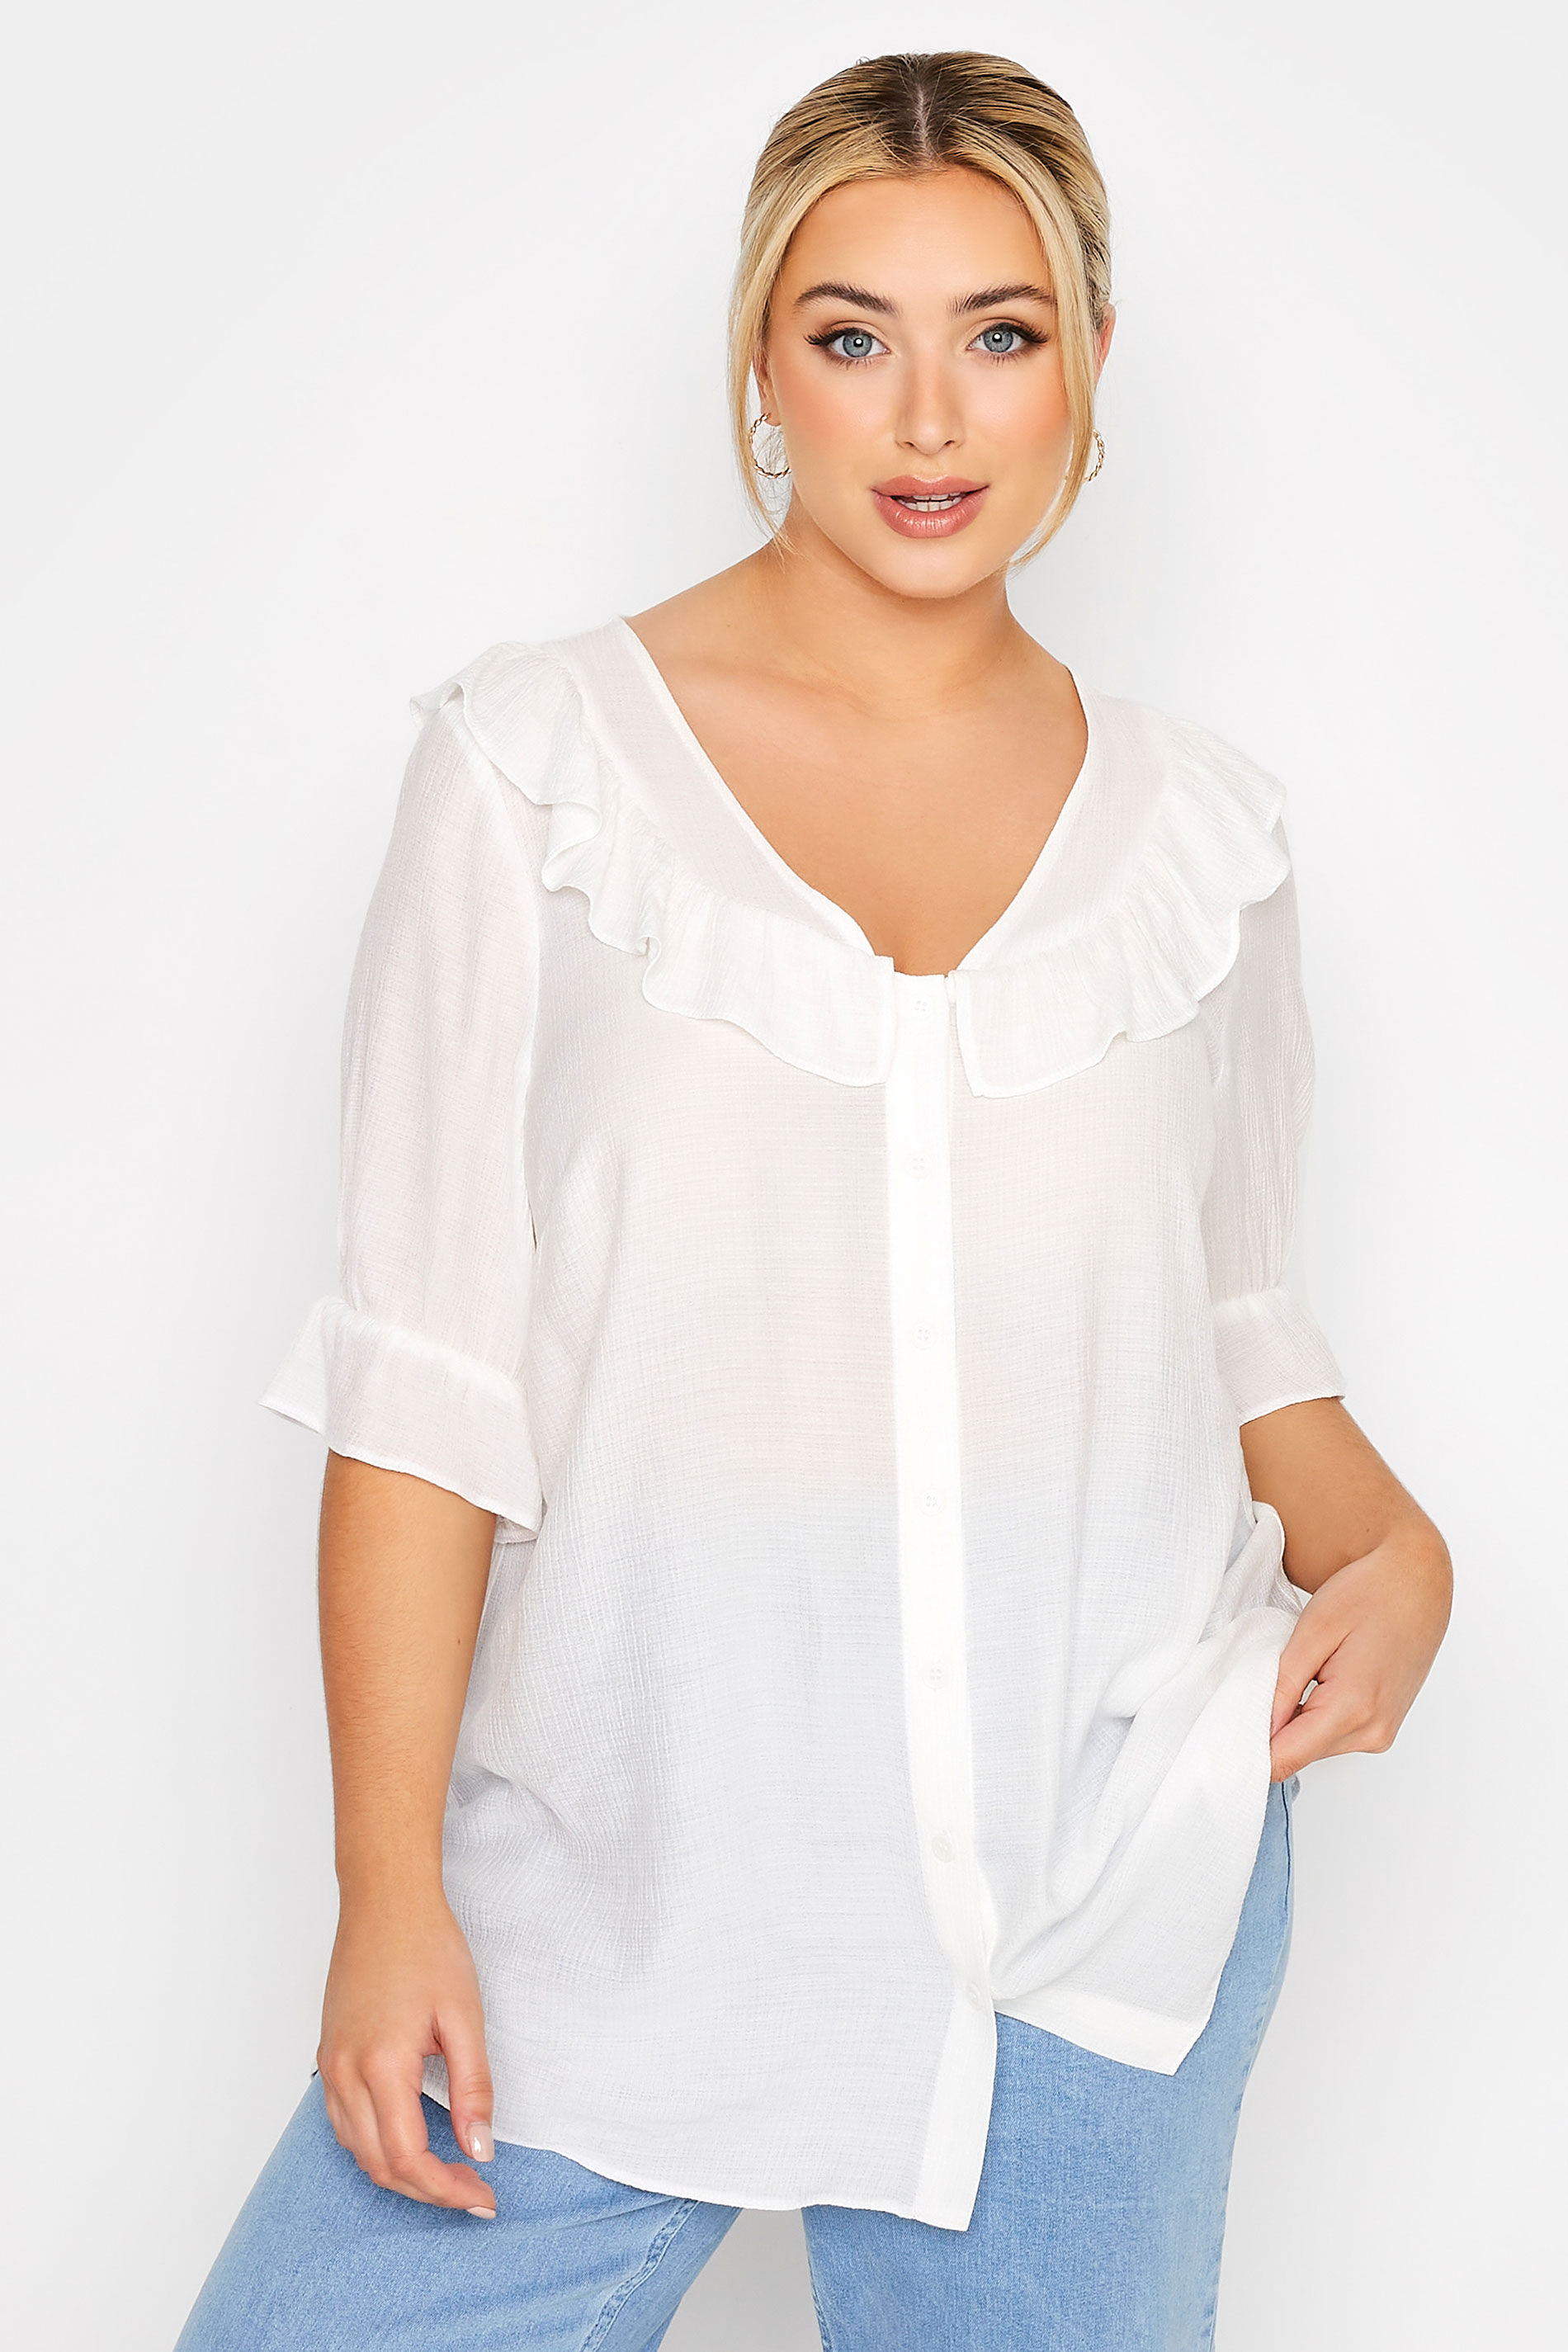 LIMITED COLLECTION Curve White Button Frill Blouse_A.jpg